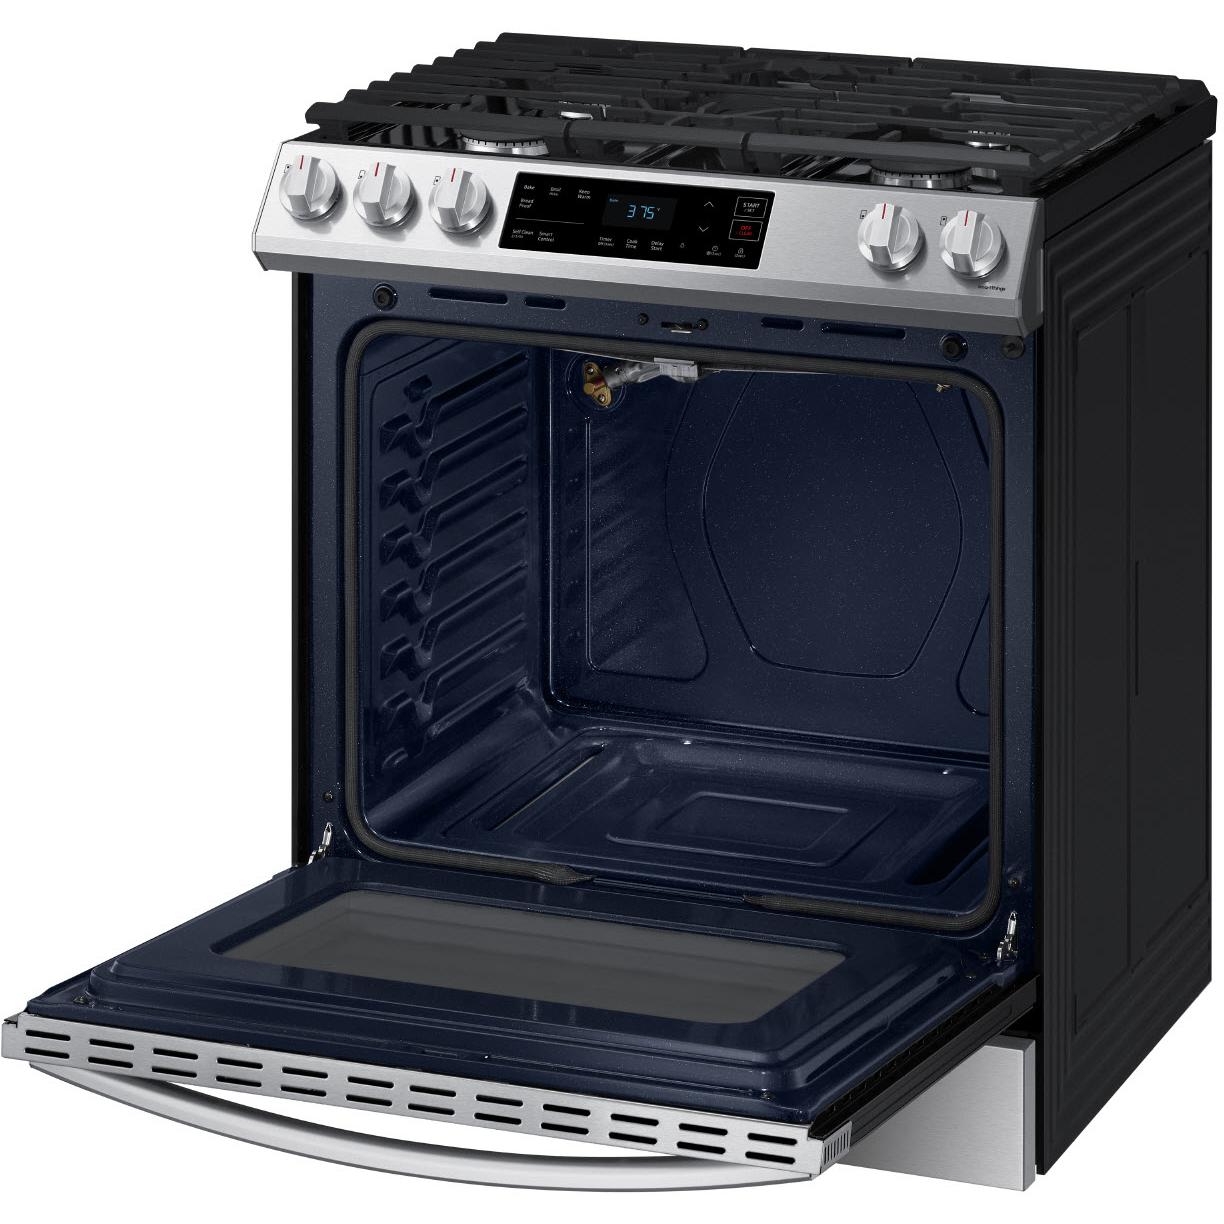 Samsung 30-inch Slide-in Gas Range with Wi-Fi Connect NX60T8111SS/AA